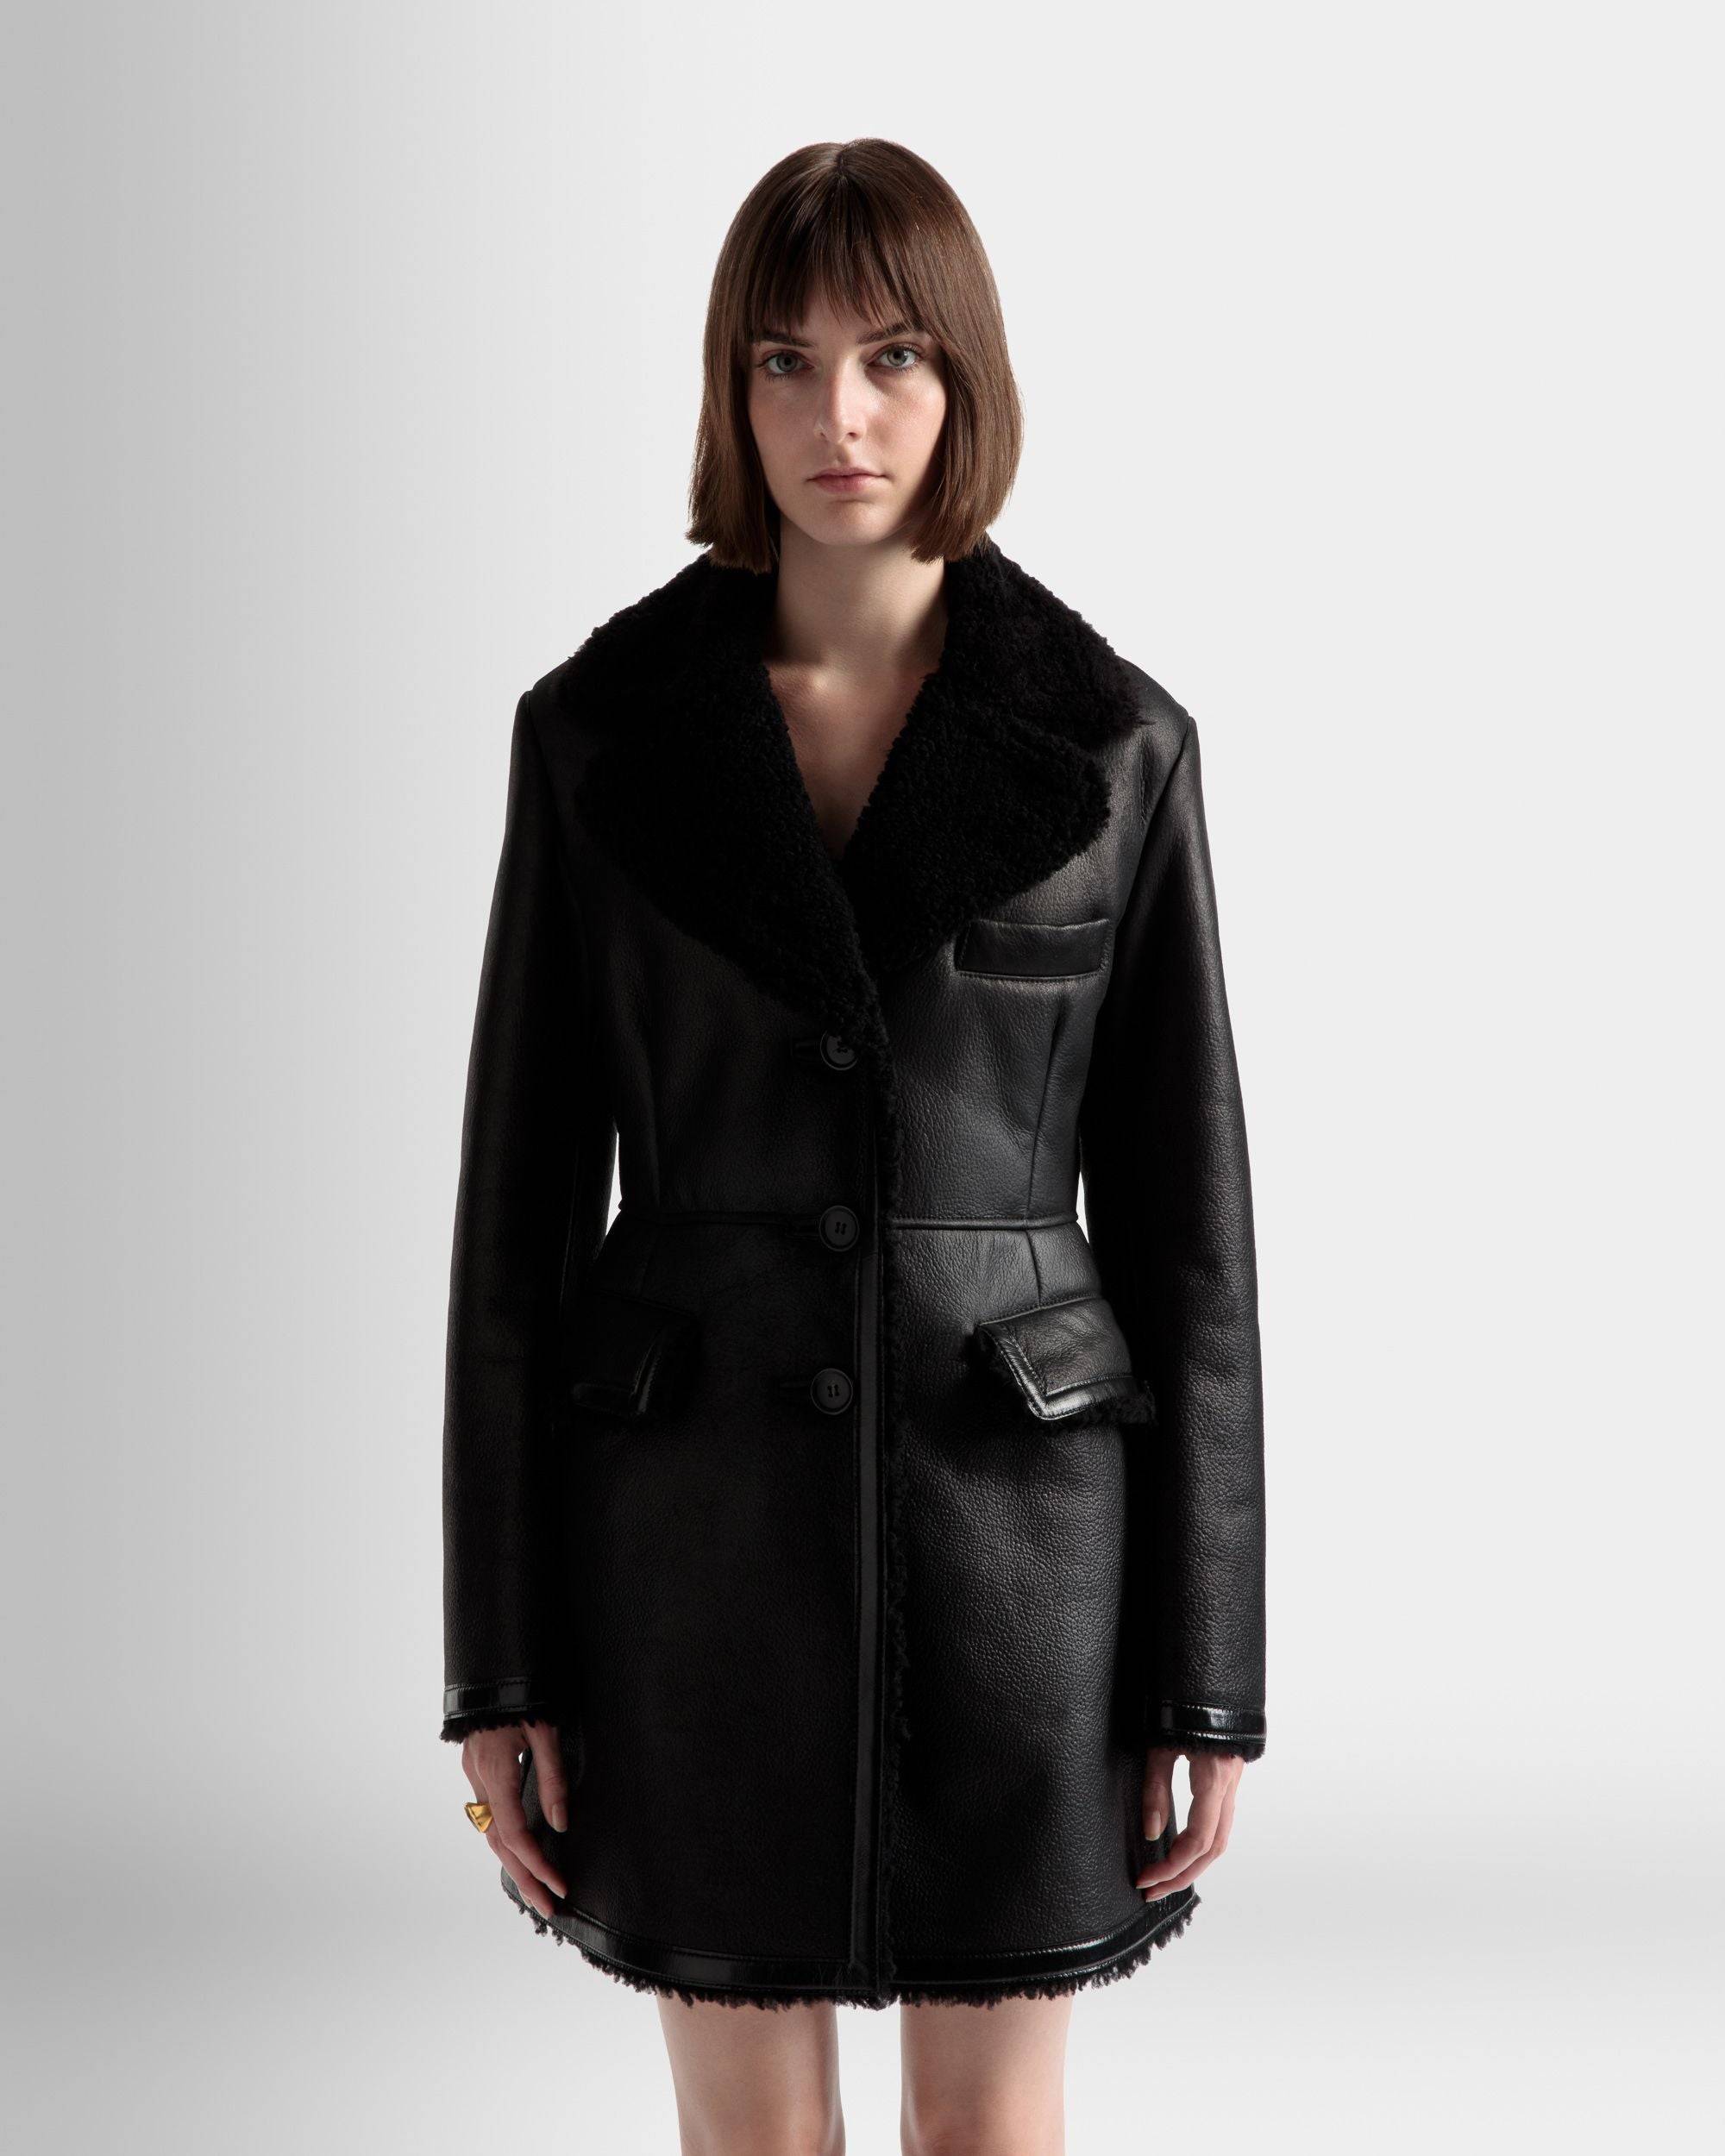 Wool-lined Coat | Women's Coat | Black Leather | Bally | On Model Close Up